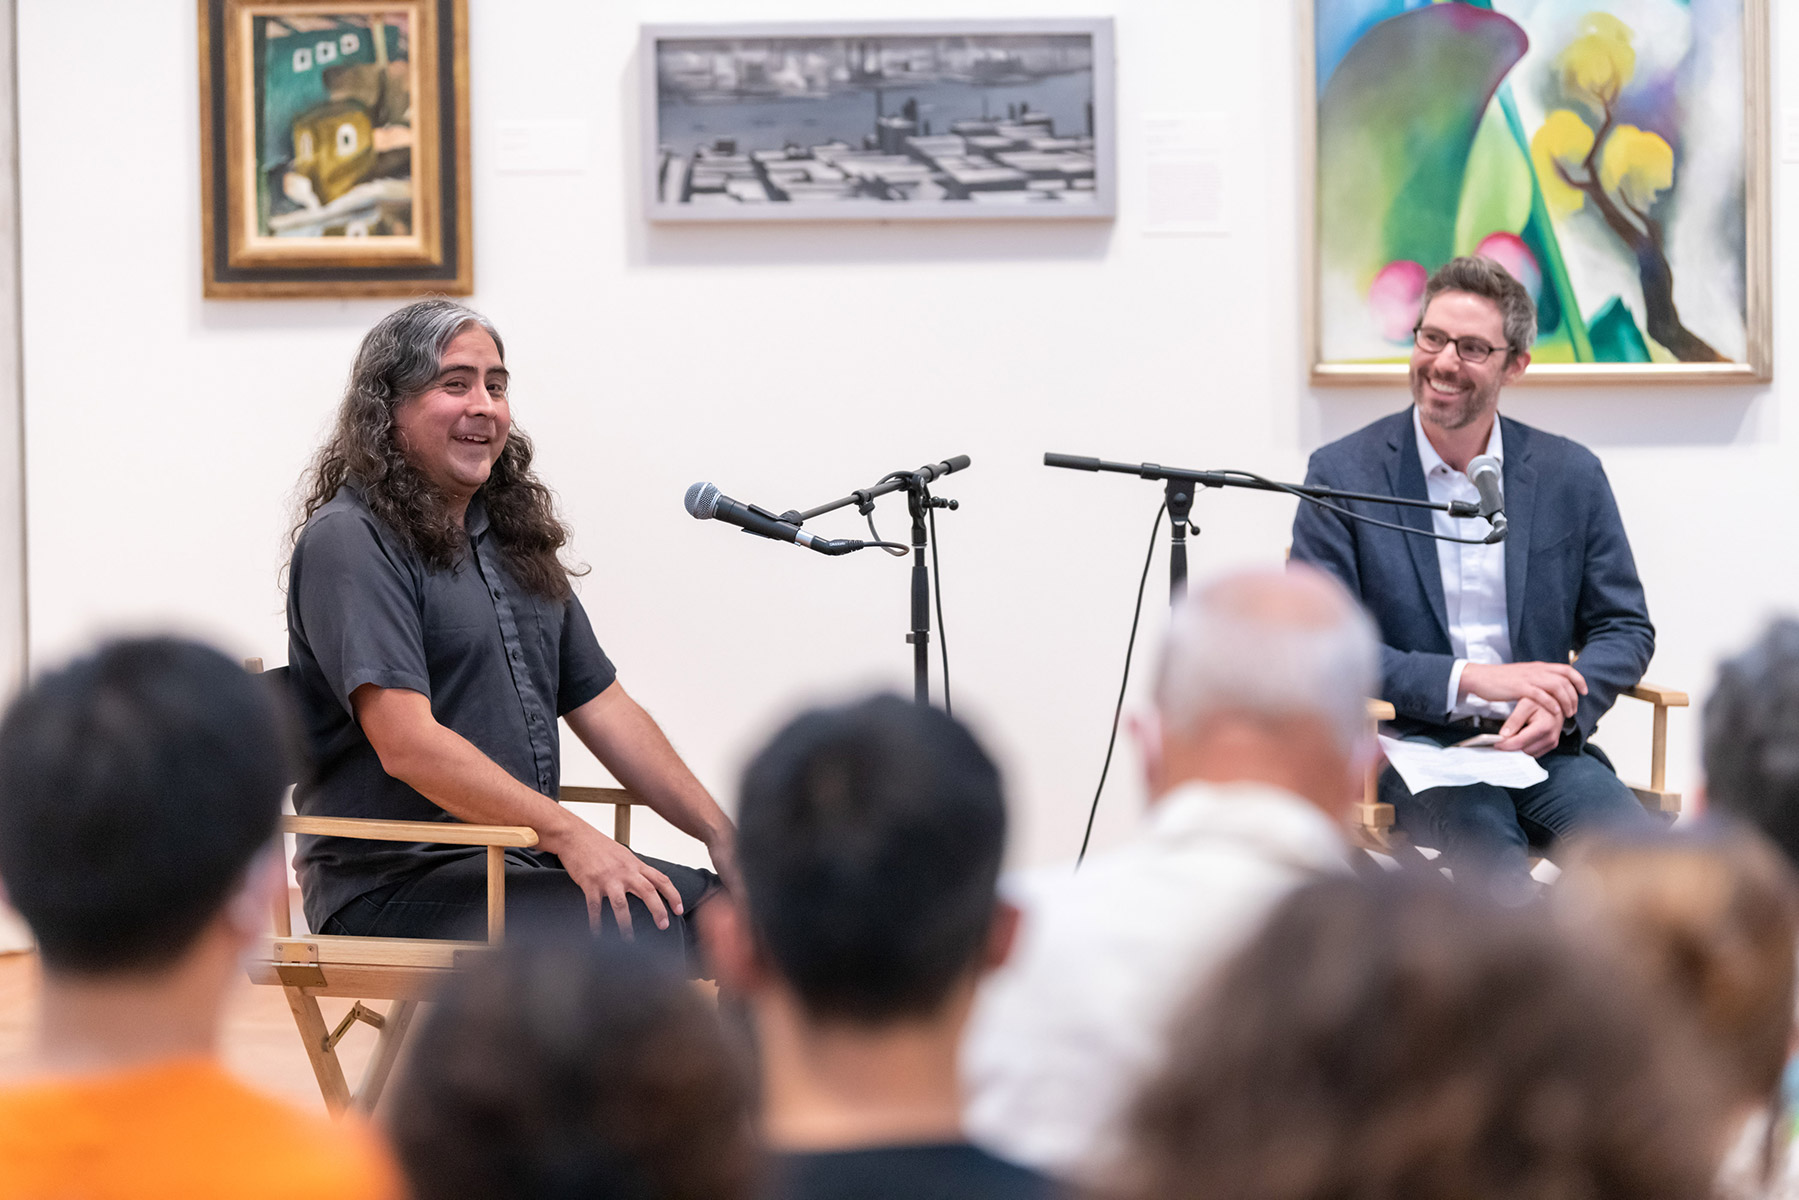 Composer Raven Chacon (left) engaged in a conversation with John Murphy (right), the Loeb’s Curator of Prints and Drawings, prior to a performance of one of his latest works, Hose Notations.